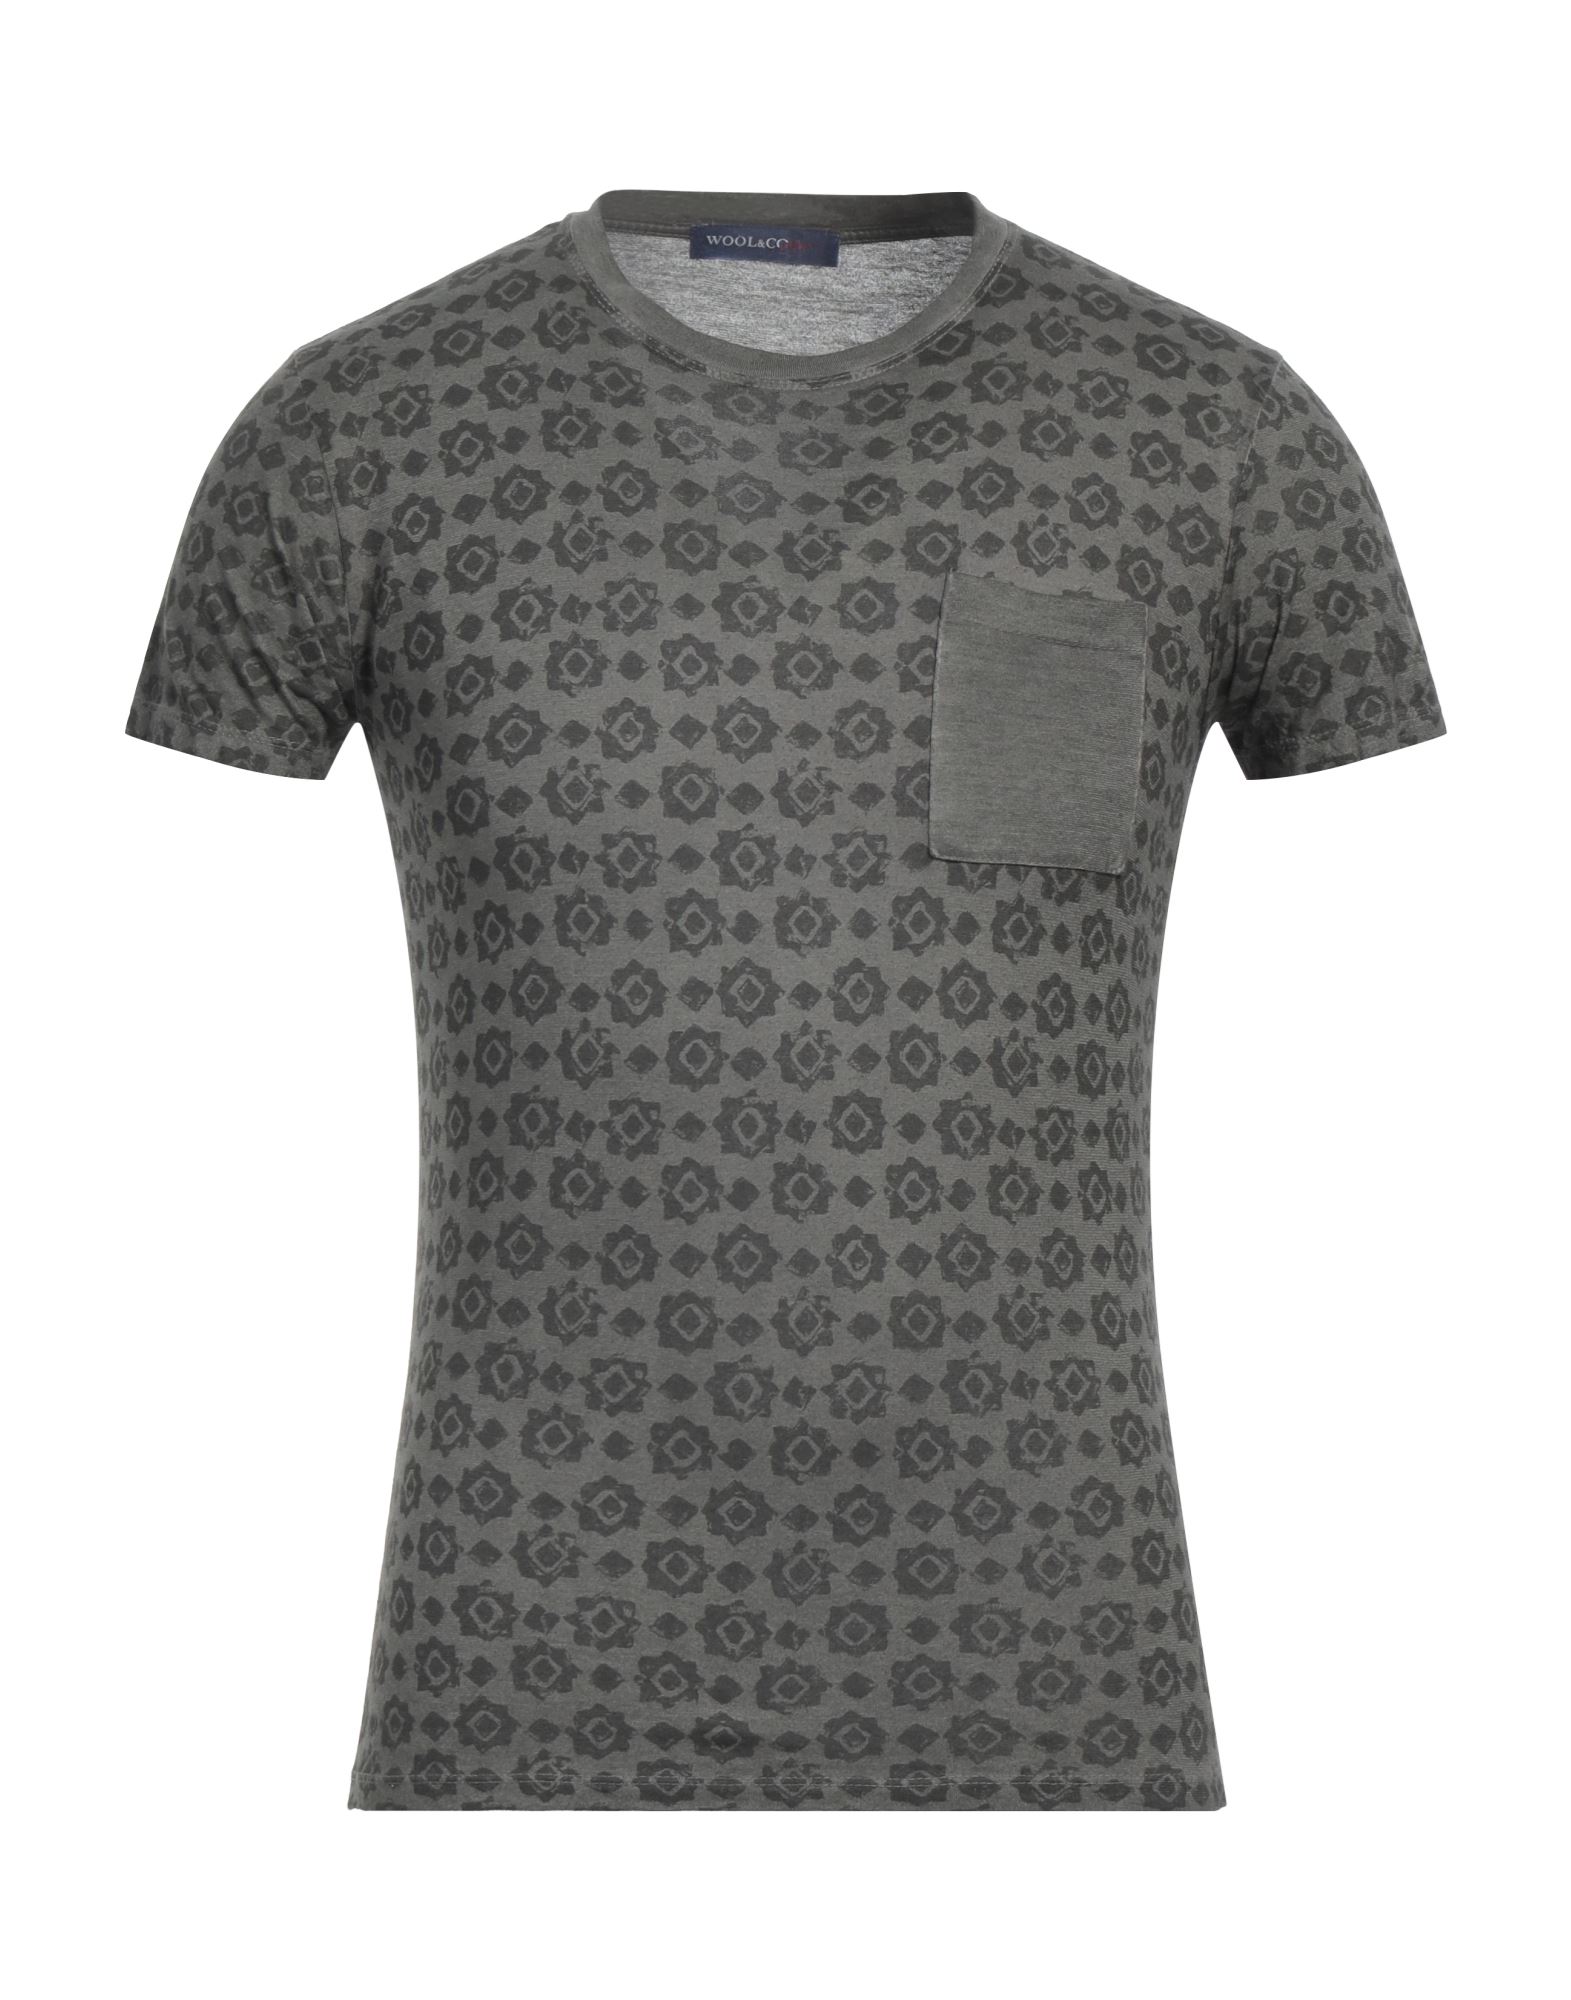 Wool & Co T-shirts In Grey